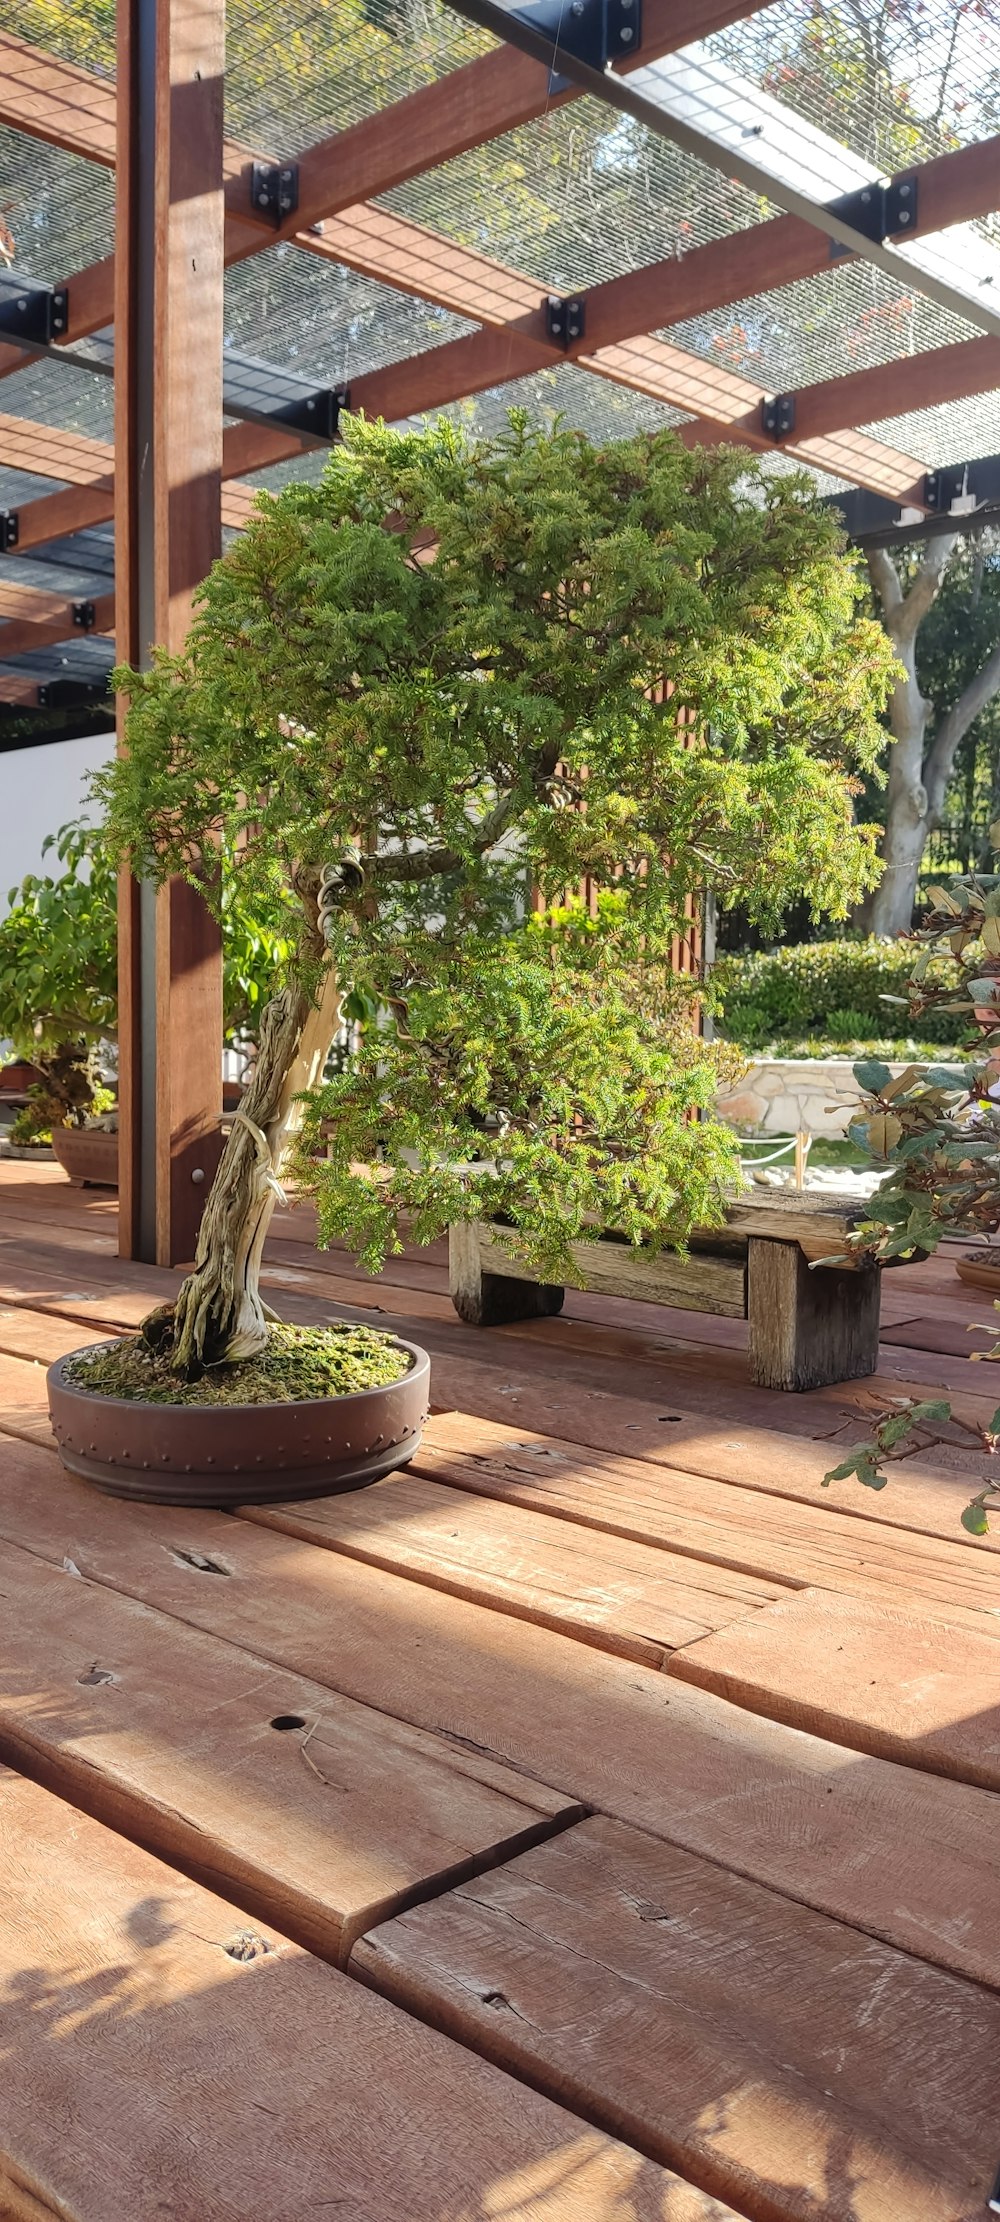 a bonsai tree in a pot on a wooden table